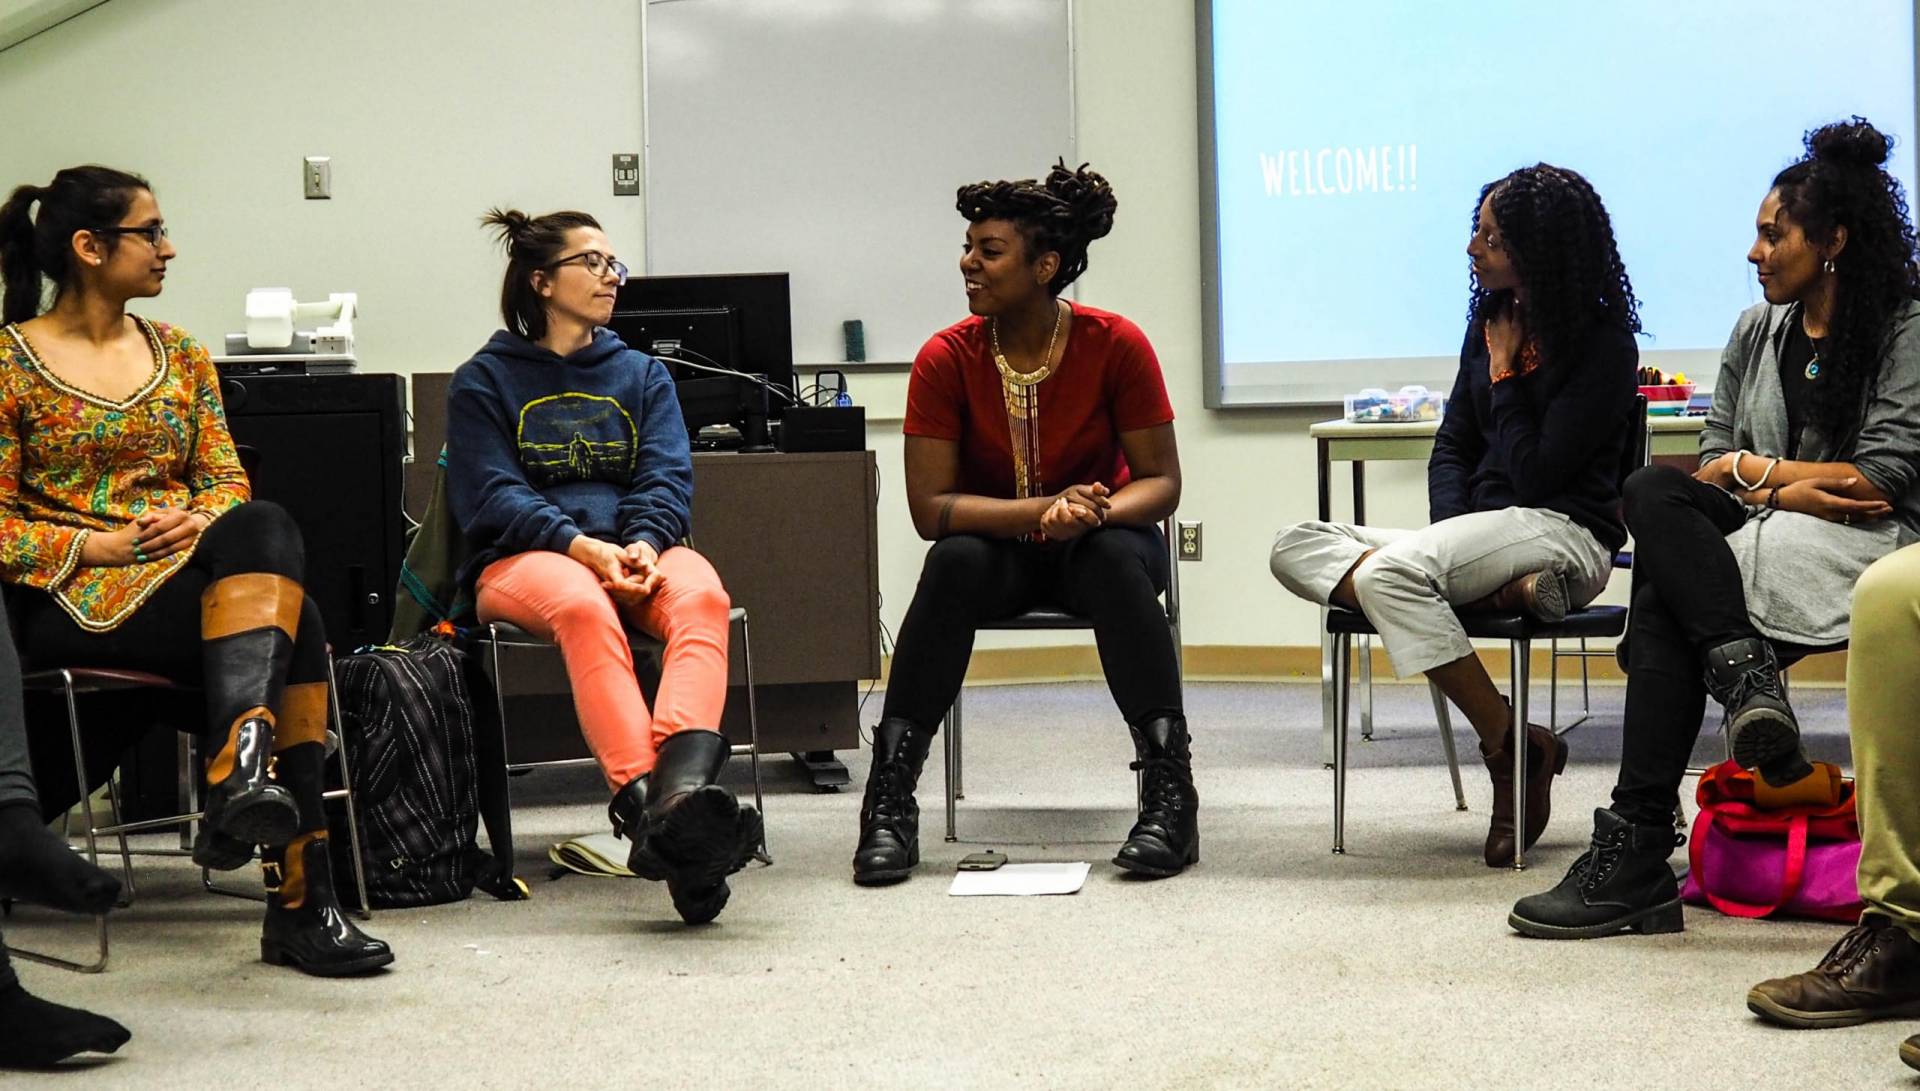 Image of Ruby and several youth sitting on chairs in a circle engaged in conversation